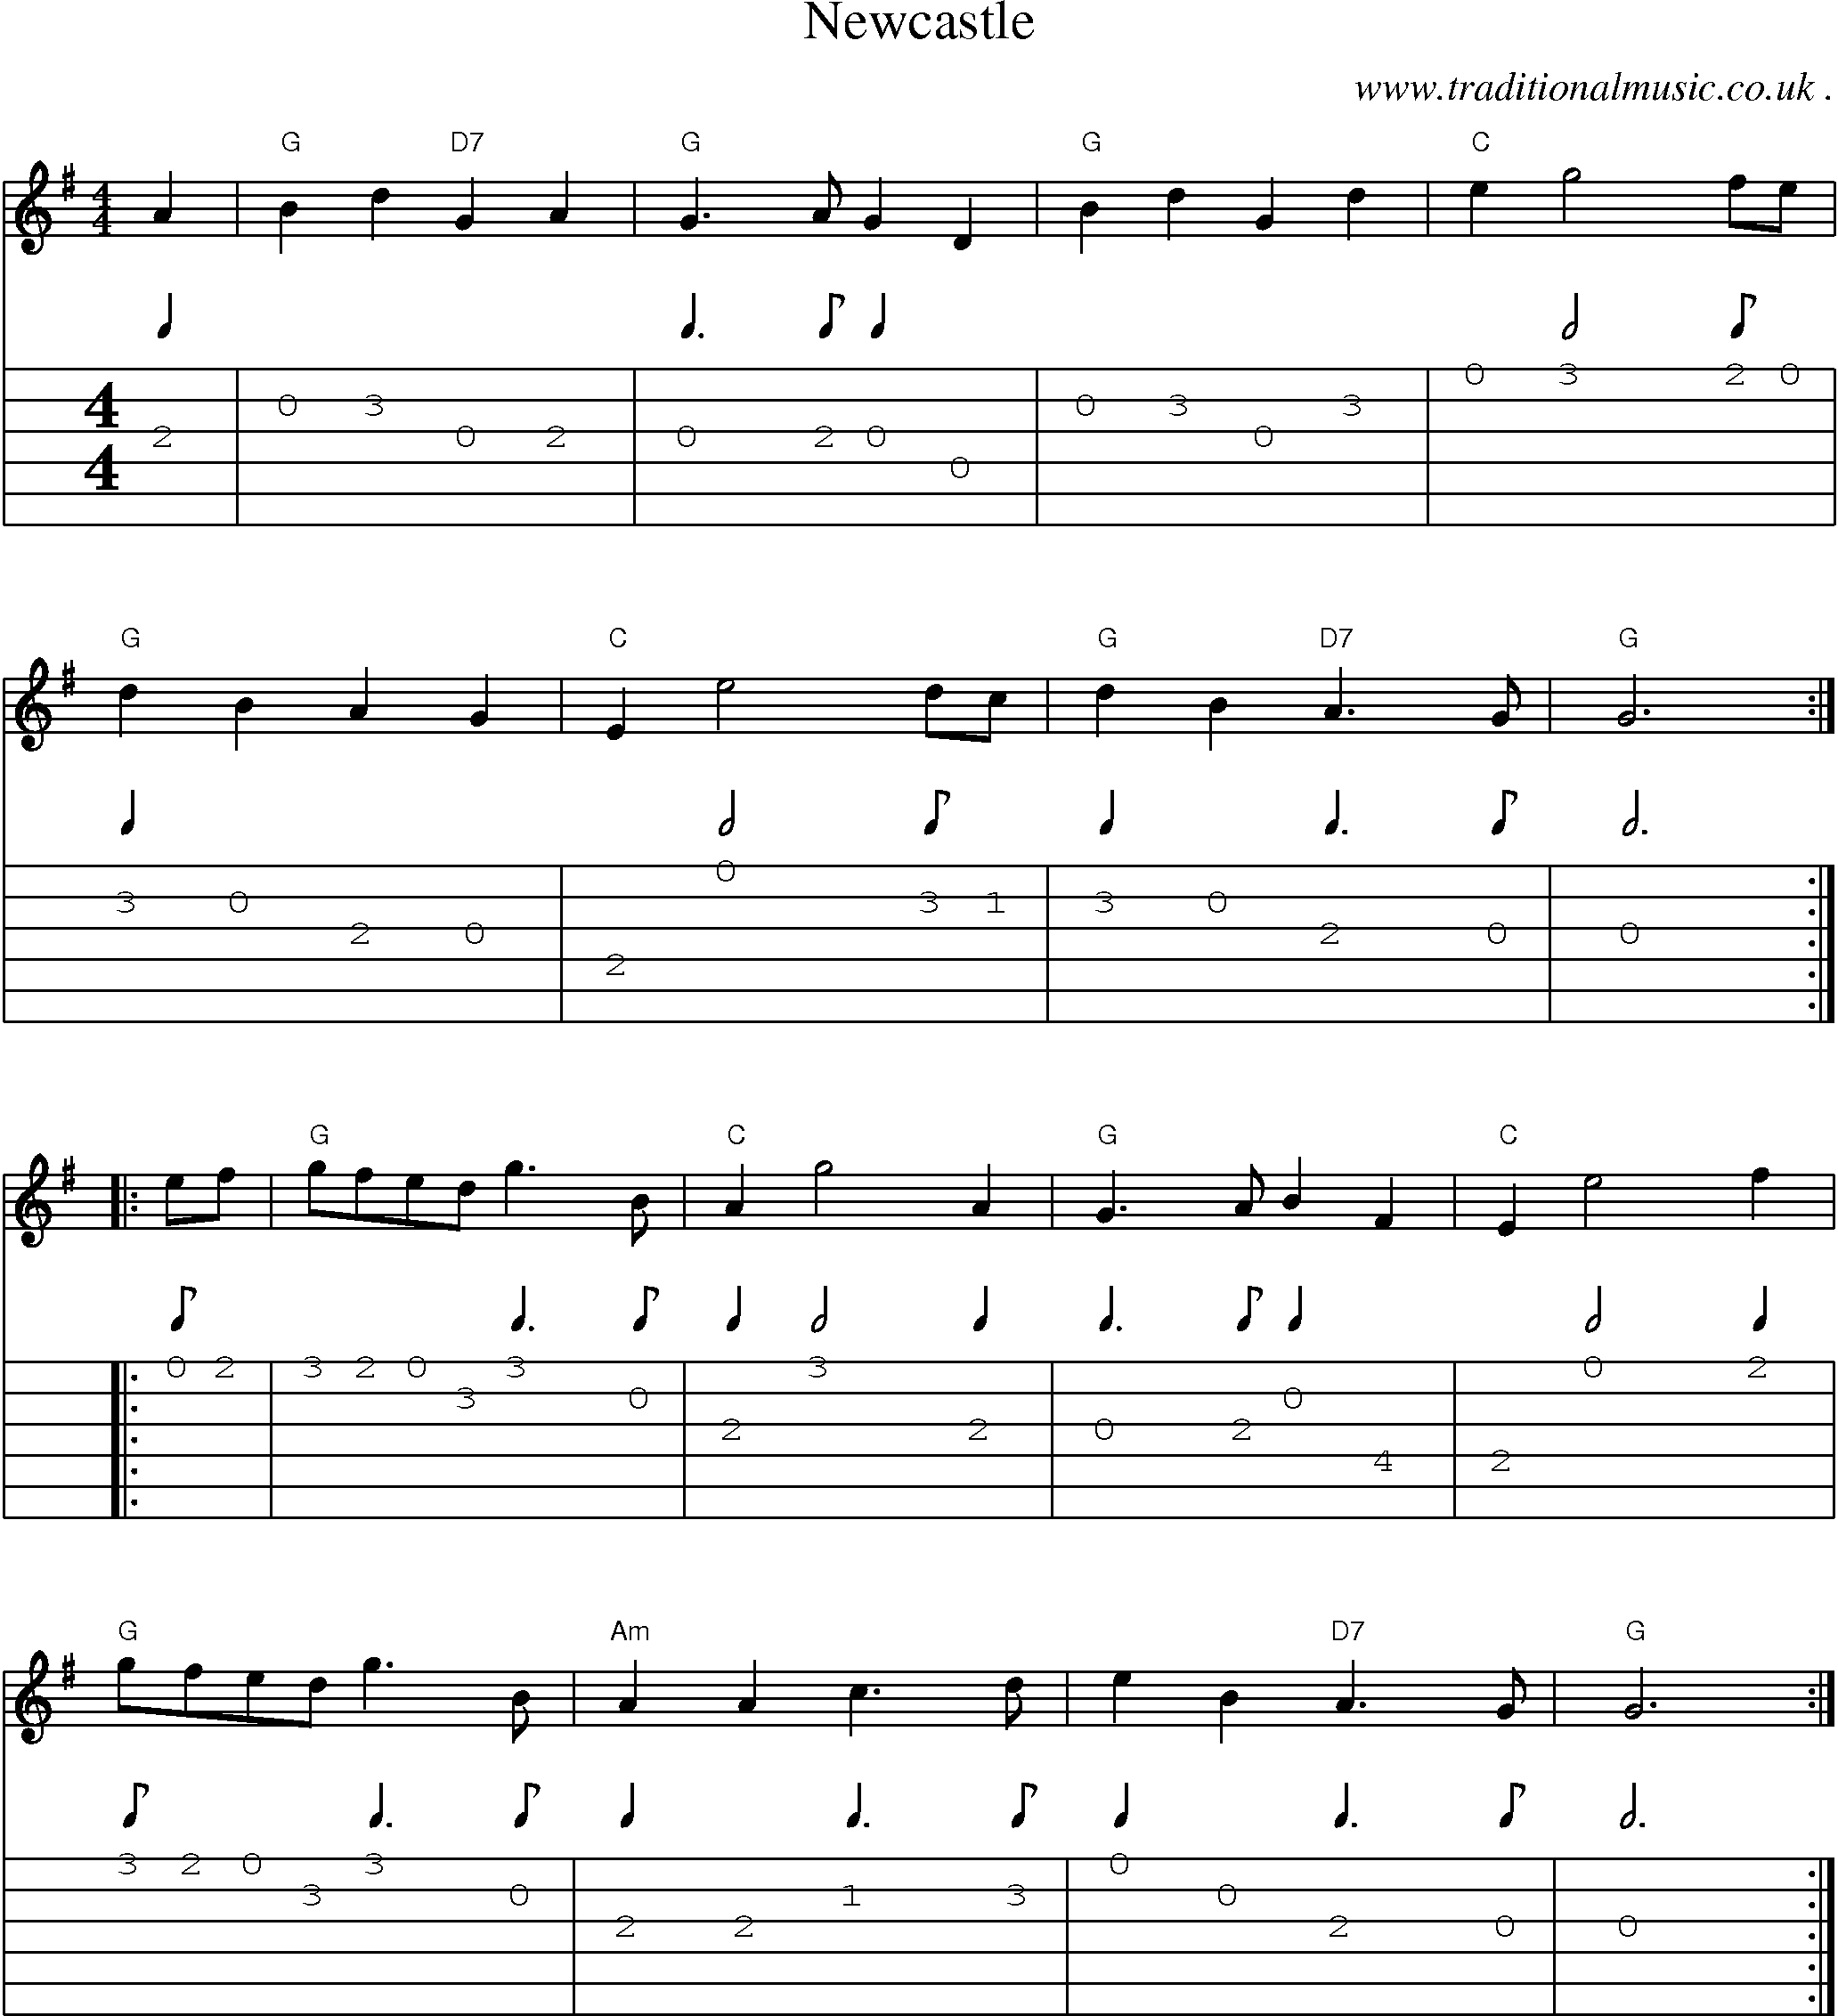 Music Score and Guitar Tabs for Newcastle